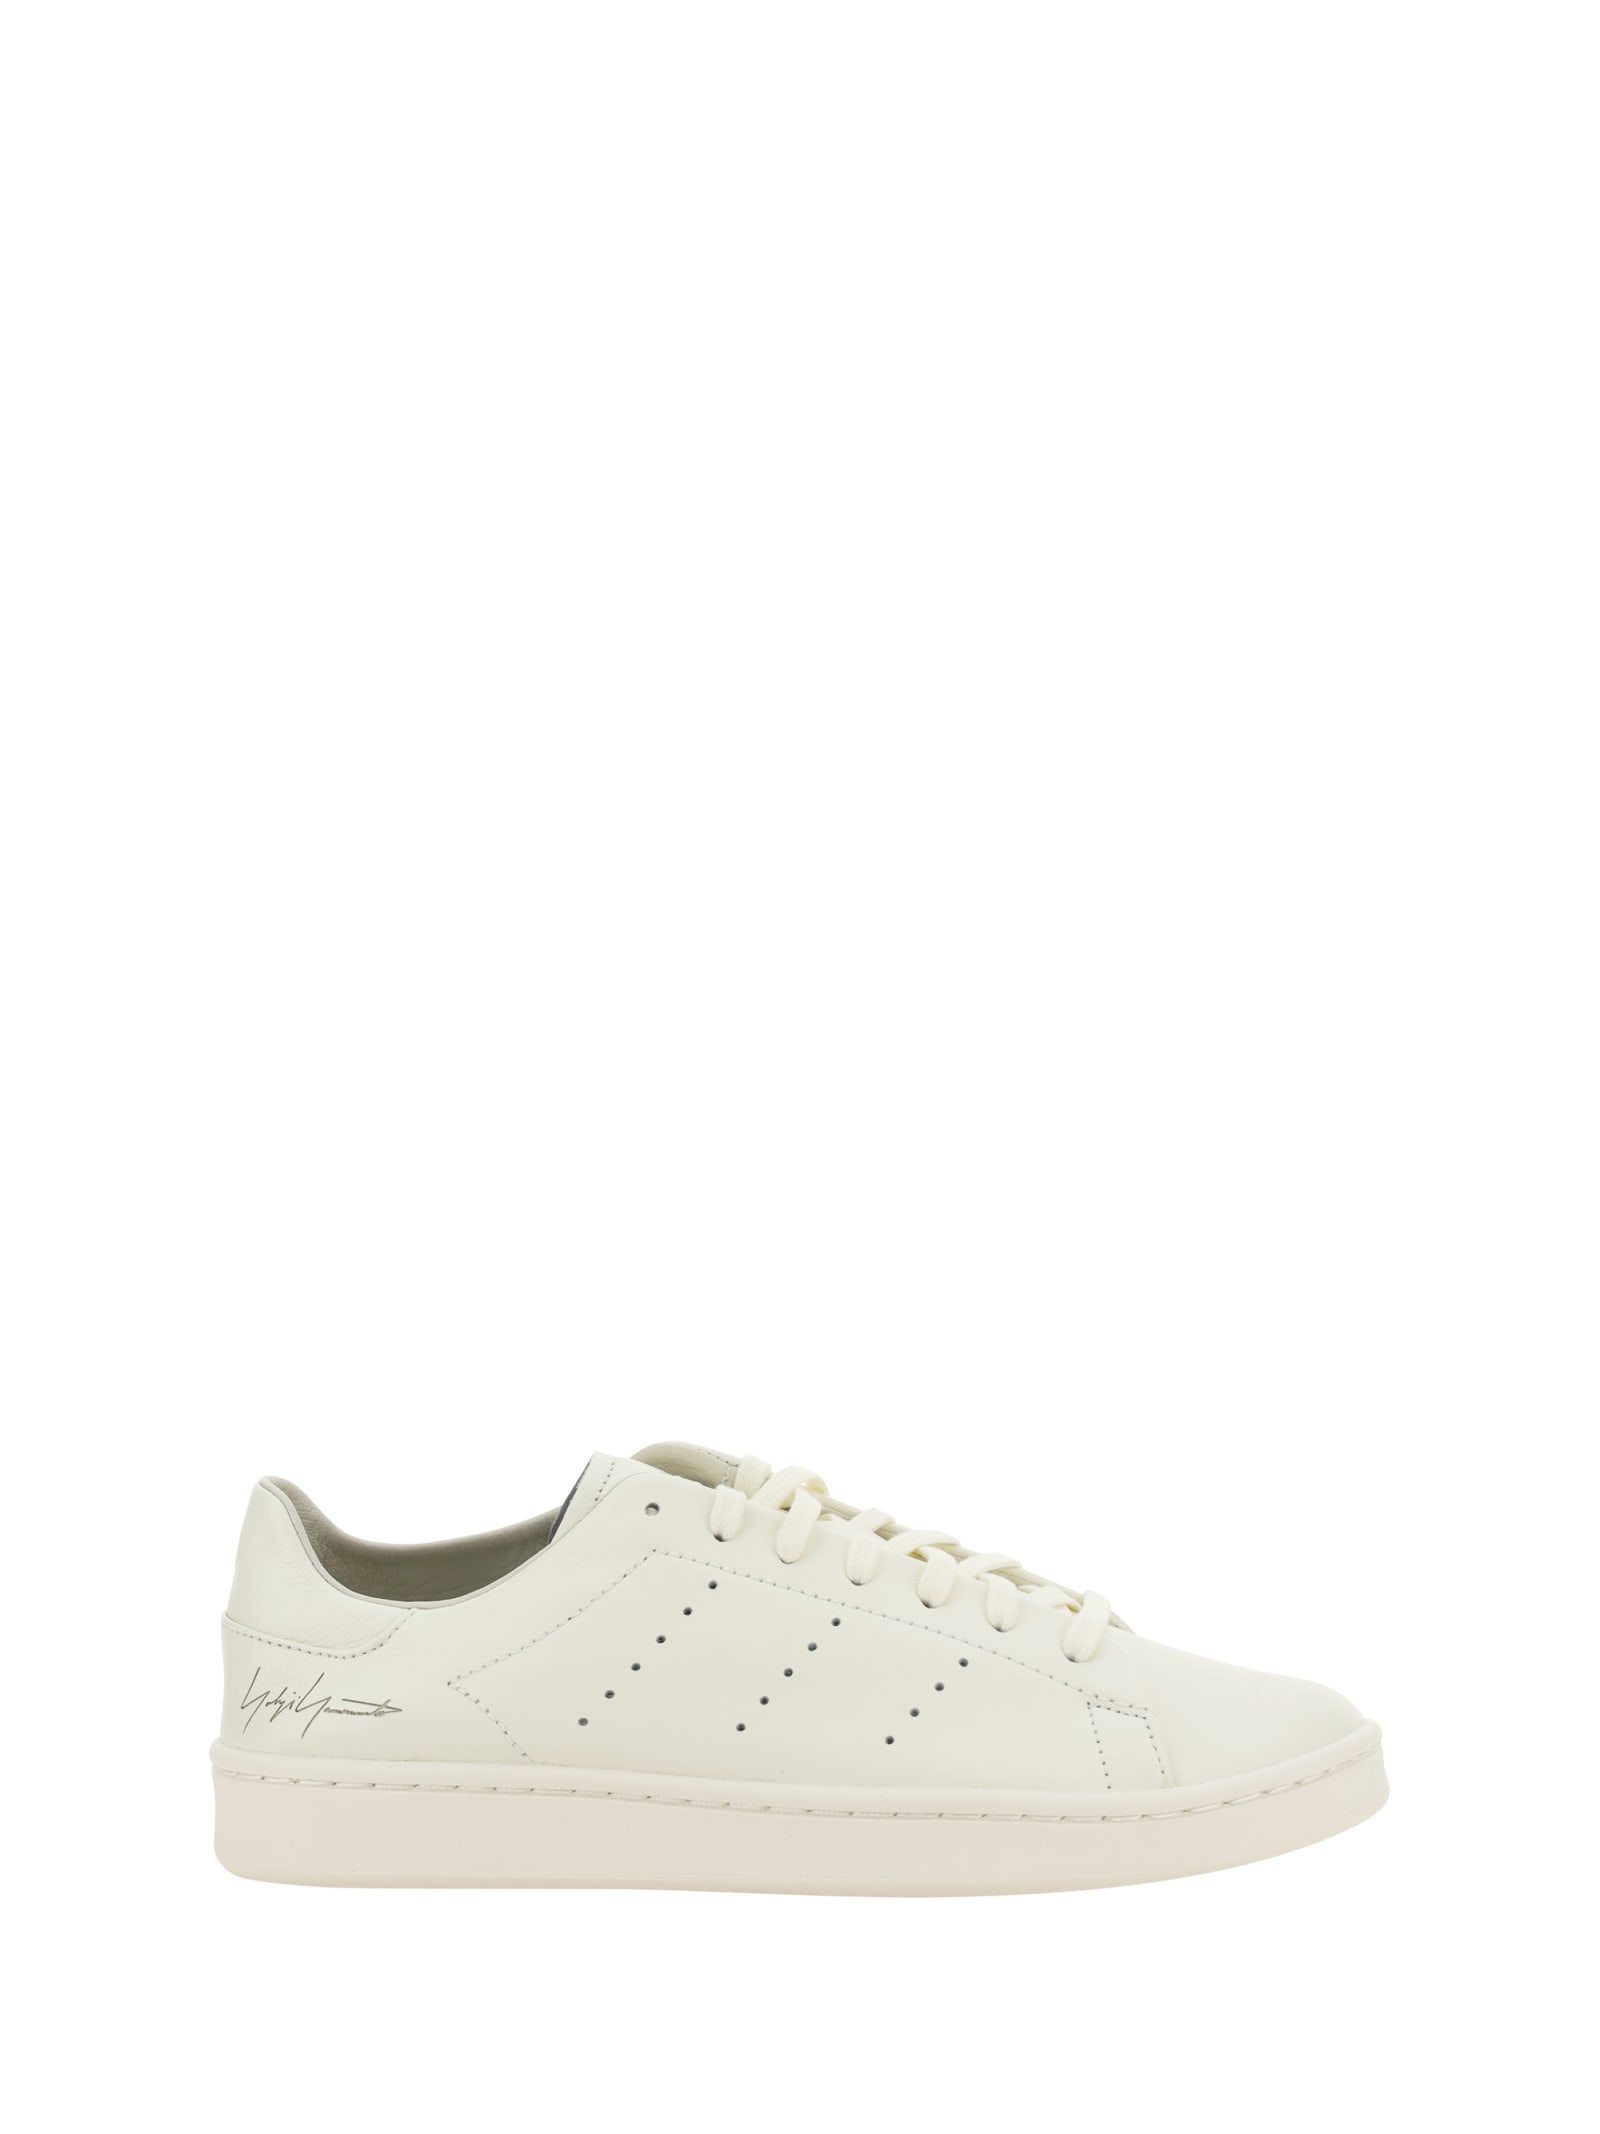 Y-3 STAN SMITH SNEAKERS